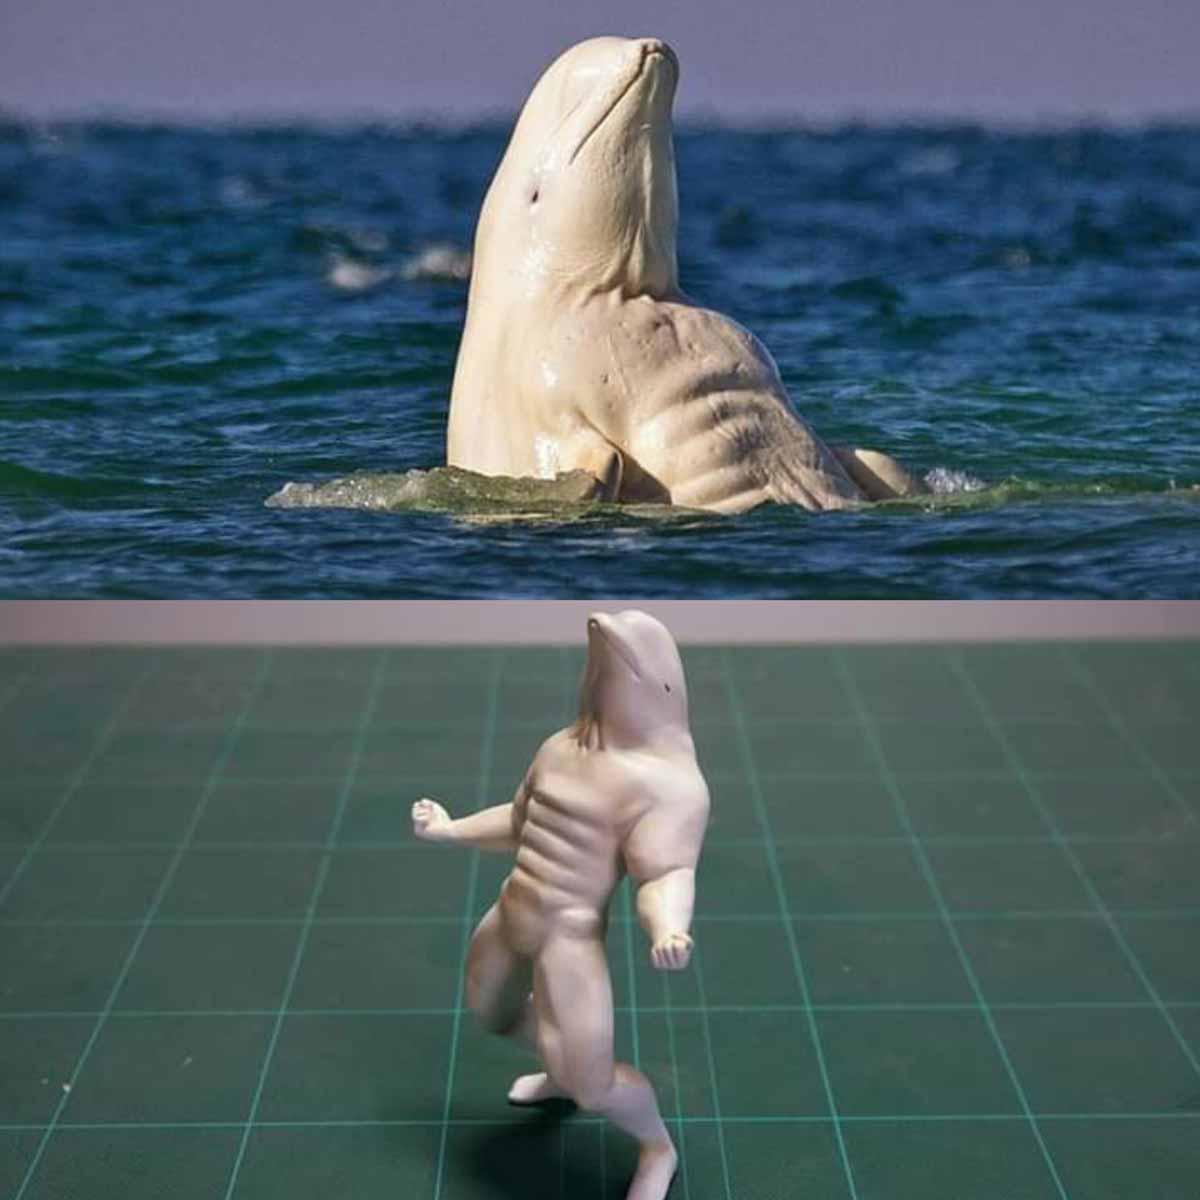 Funny picture of a white beluga whale surfacing and looking like it has abs and then an animated version of it with legs